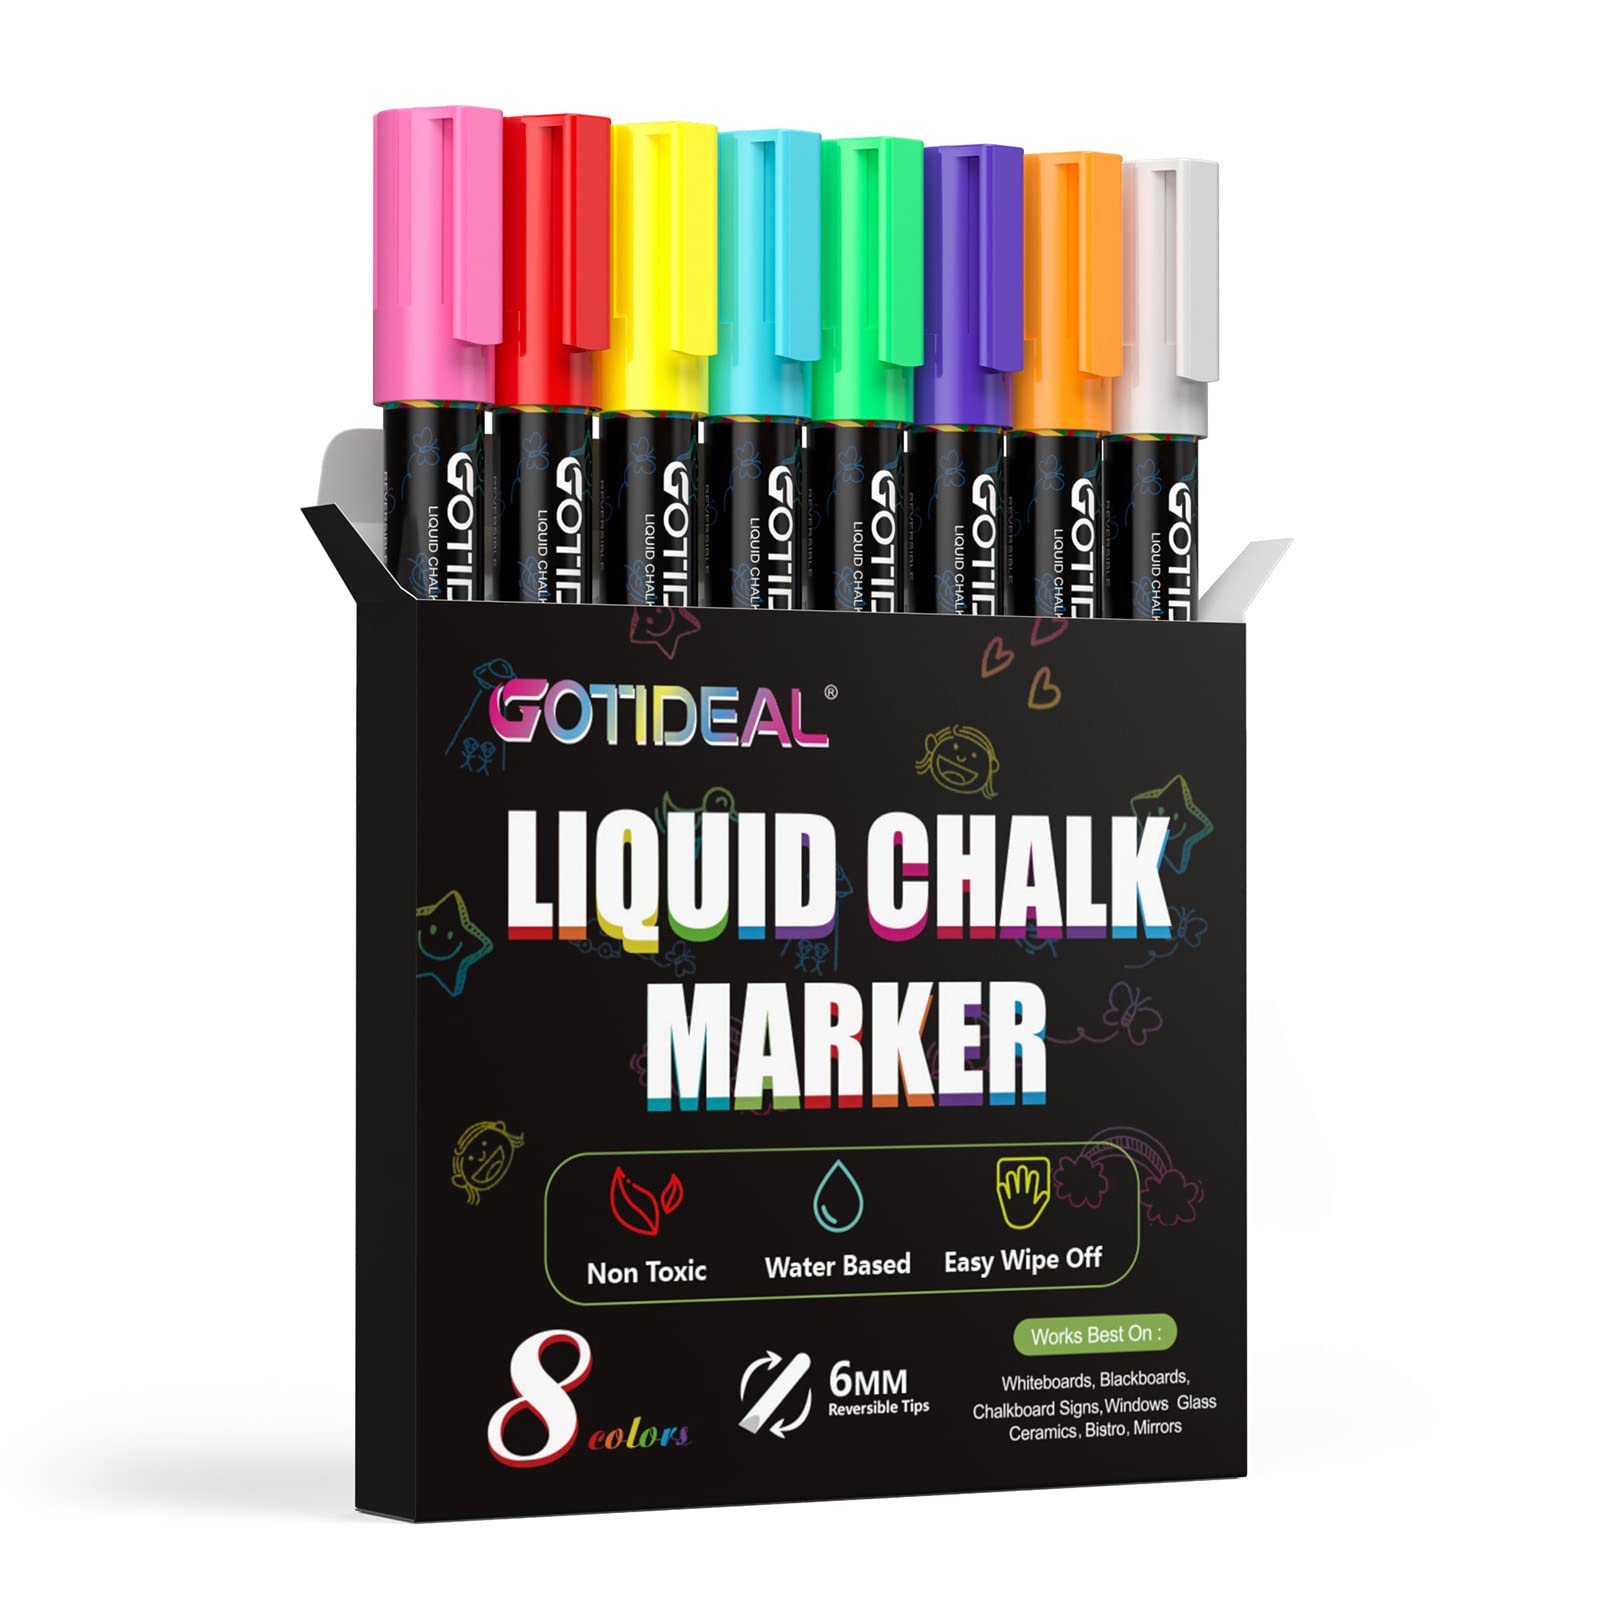 GOTIDEAL Liquid Chalk Markers Bold Tip 8 Colors Washable Window